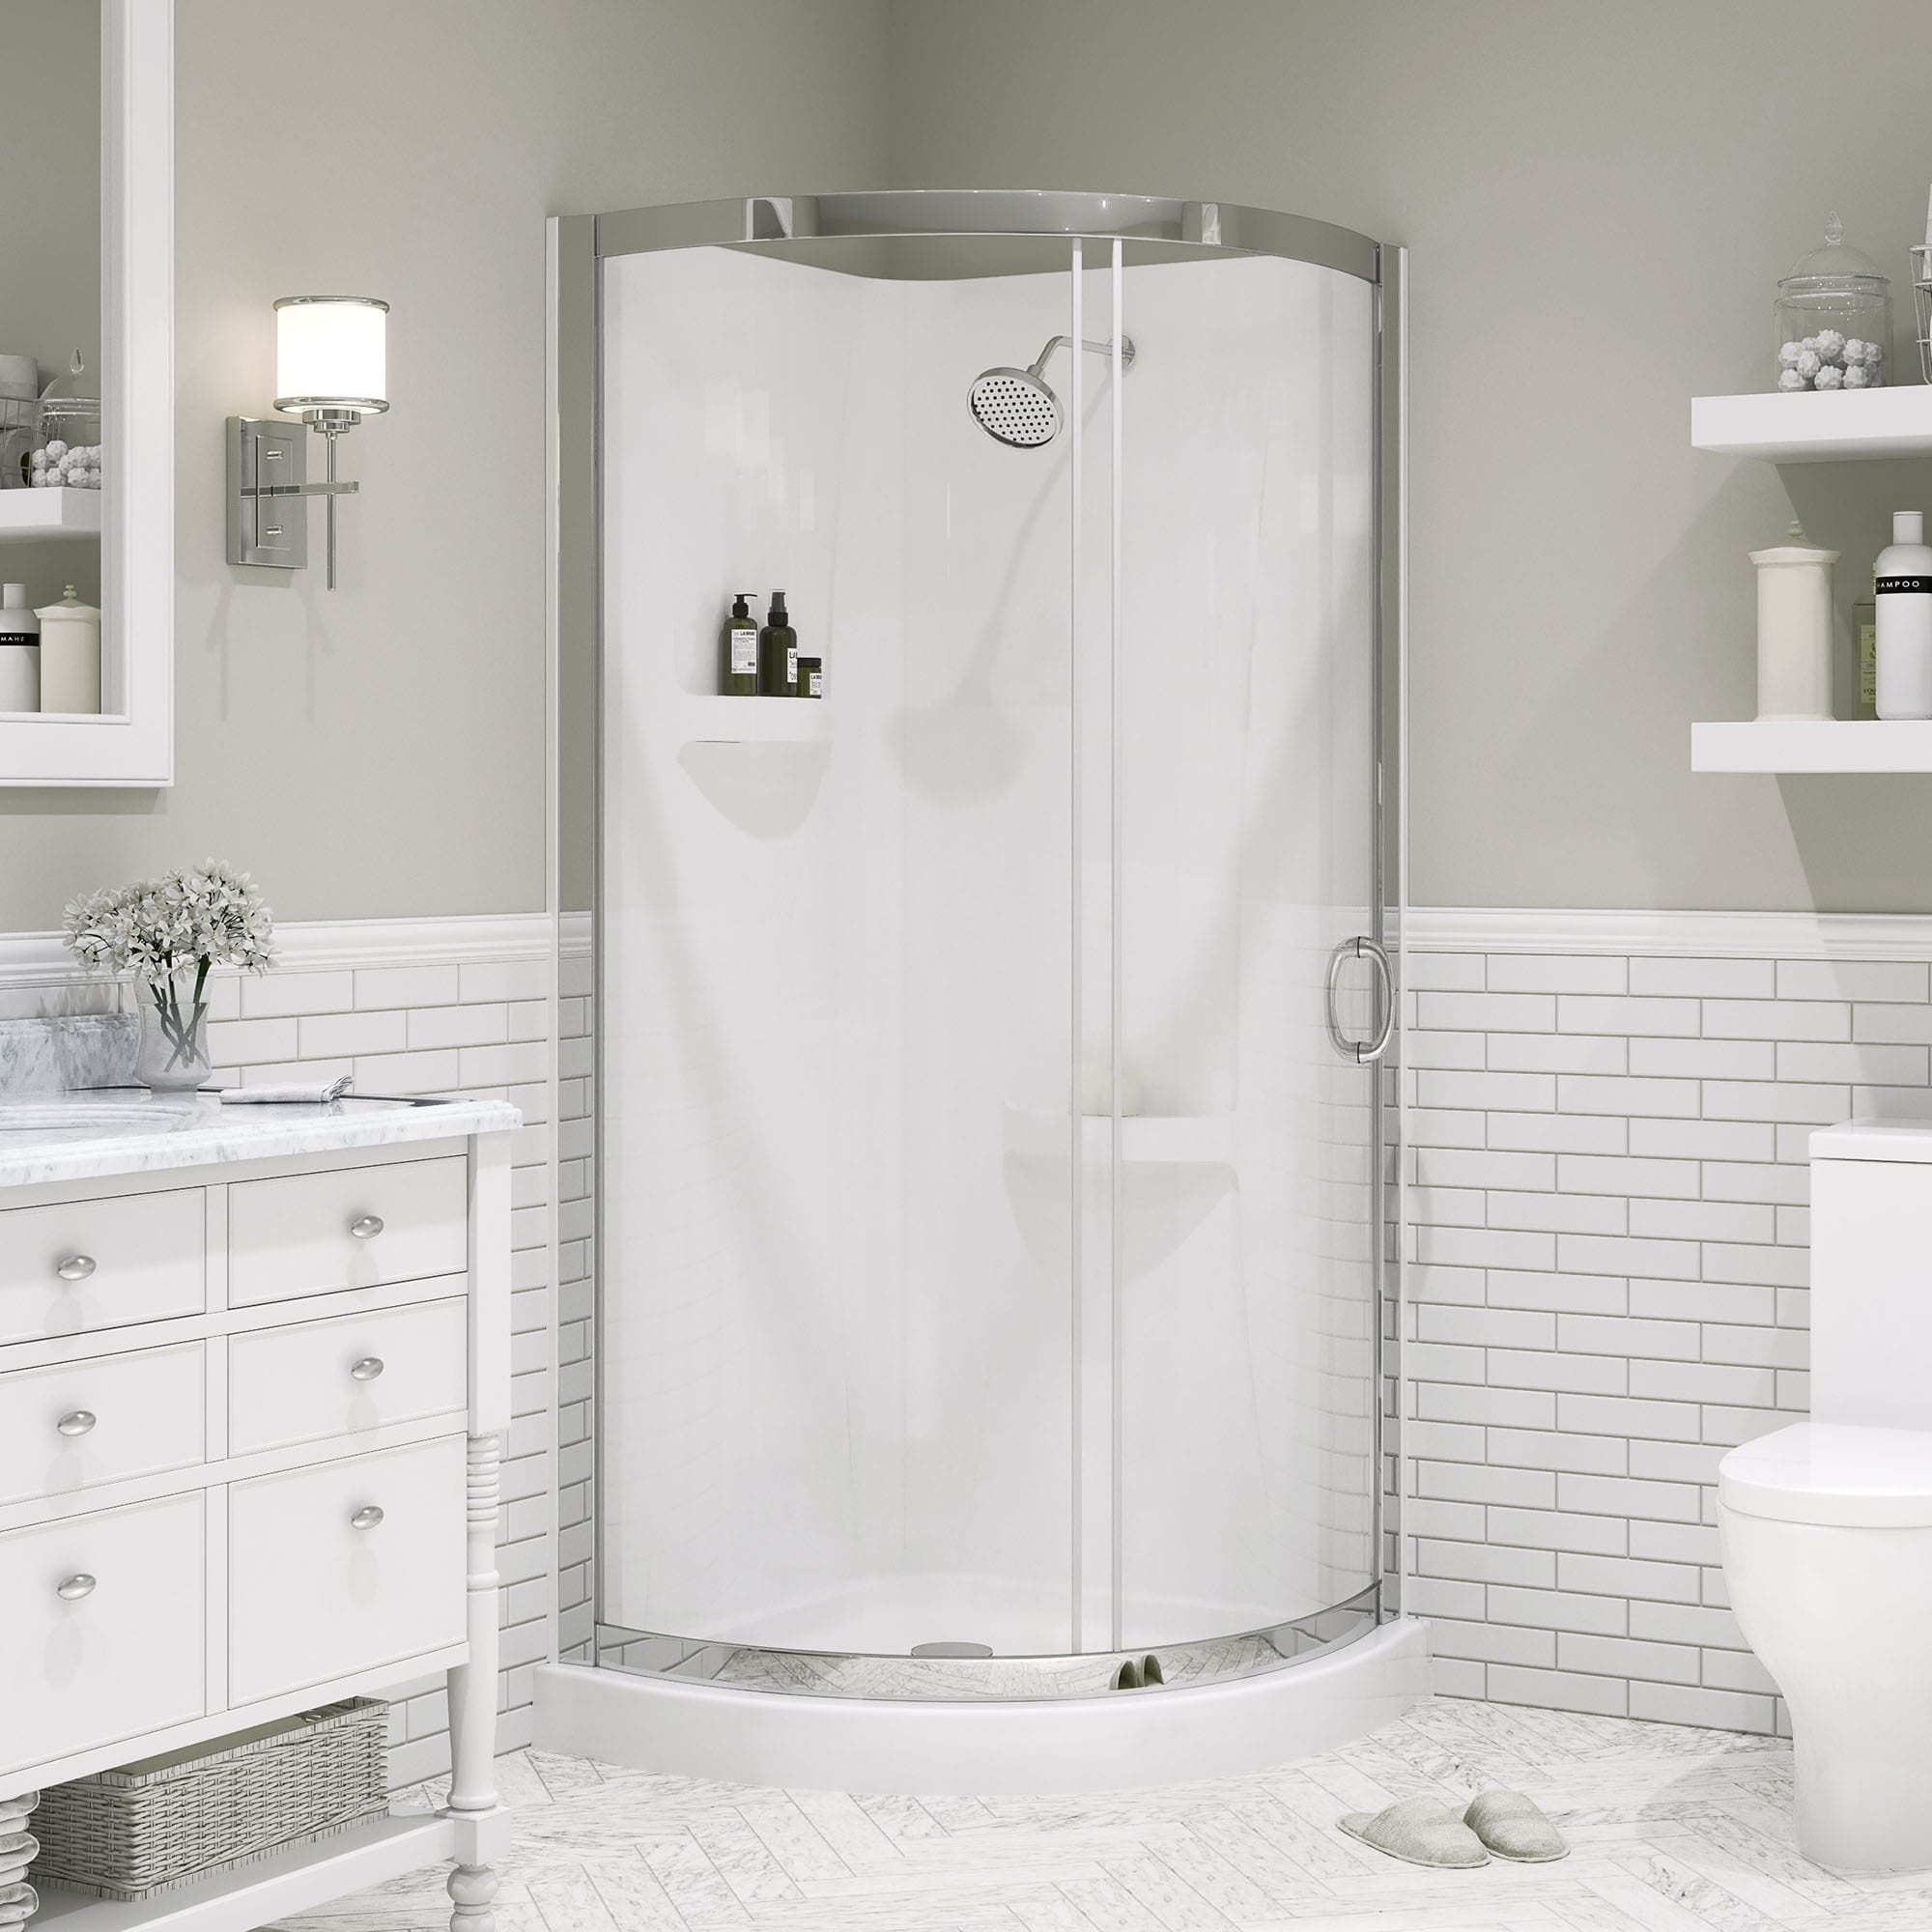 https://ak1.ostkcdn.com/images/products/is/images/direct/f880a6610a9336c7e66b49ea9e4d68ee92649a41/Ove-Decors-Breeze-32-inch-Shower-Enclosure-with-Shower-Base-and-Walls.jpg